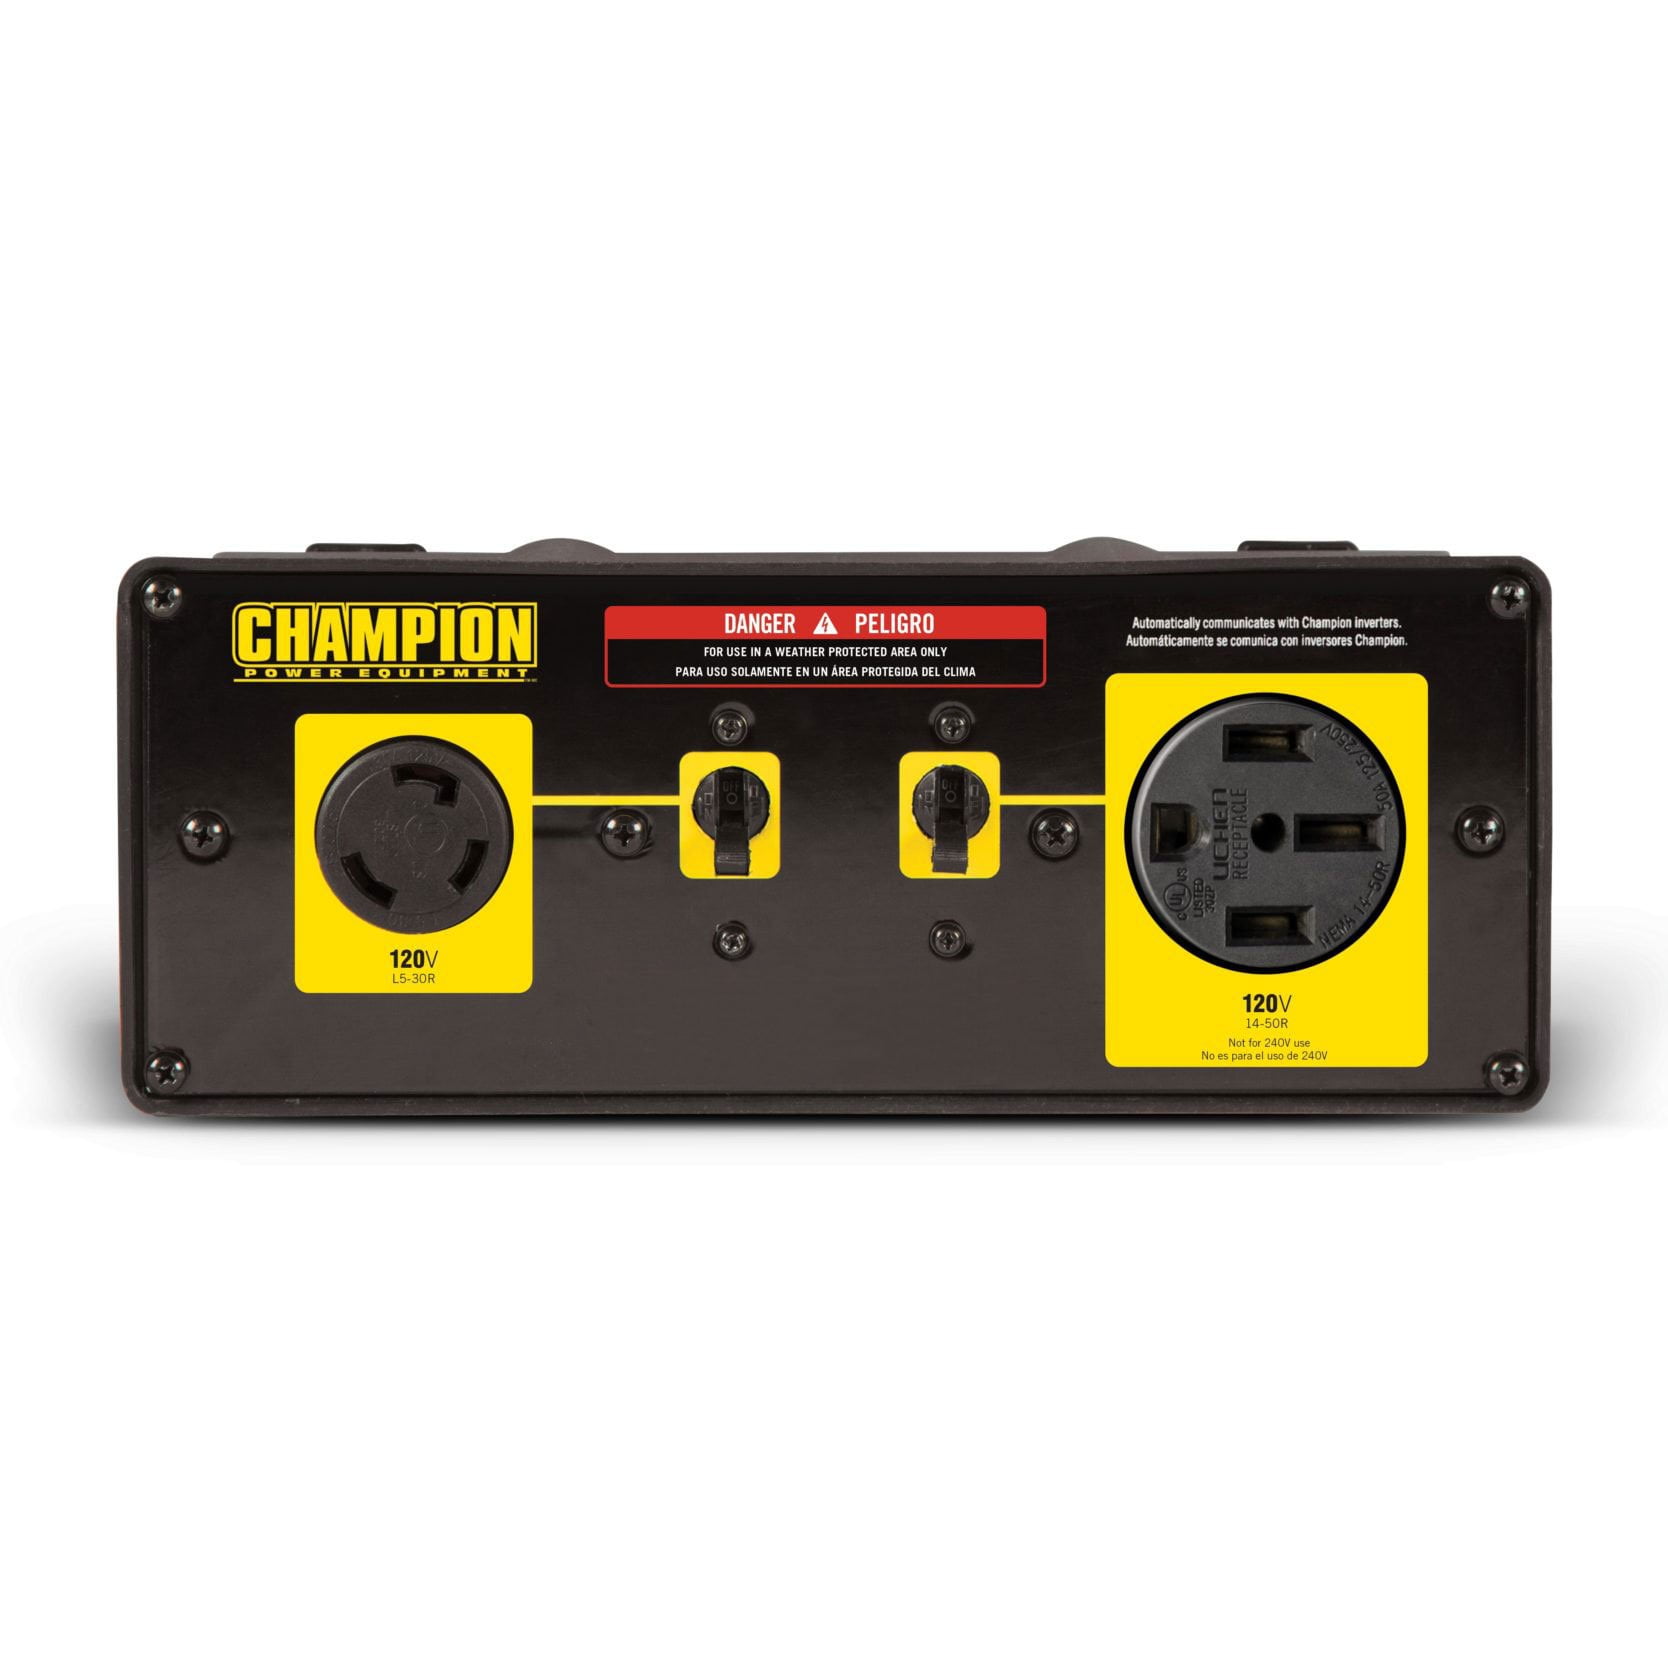 Champion Power Equipment 50-Amp RV Ready Parallel Kit for Linking